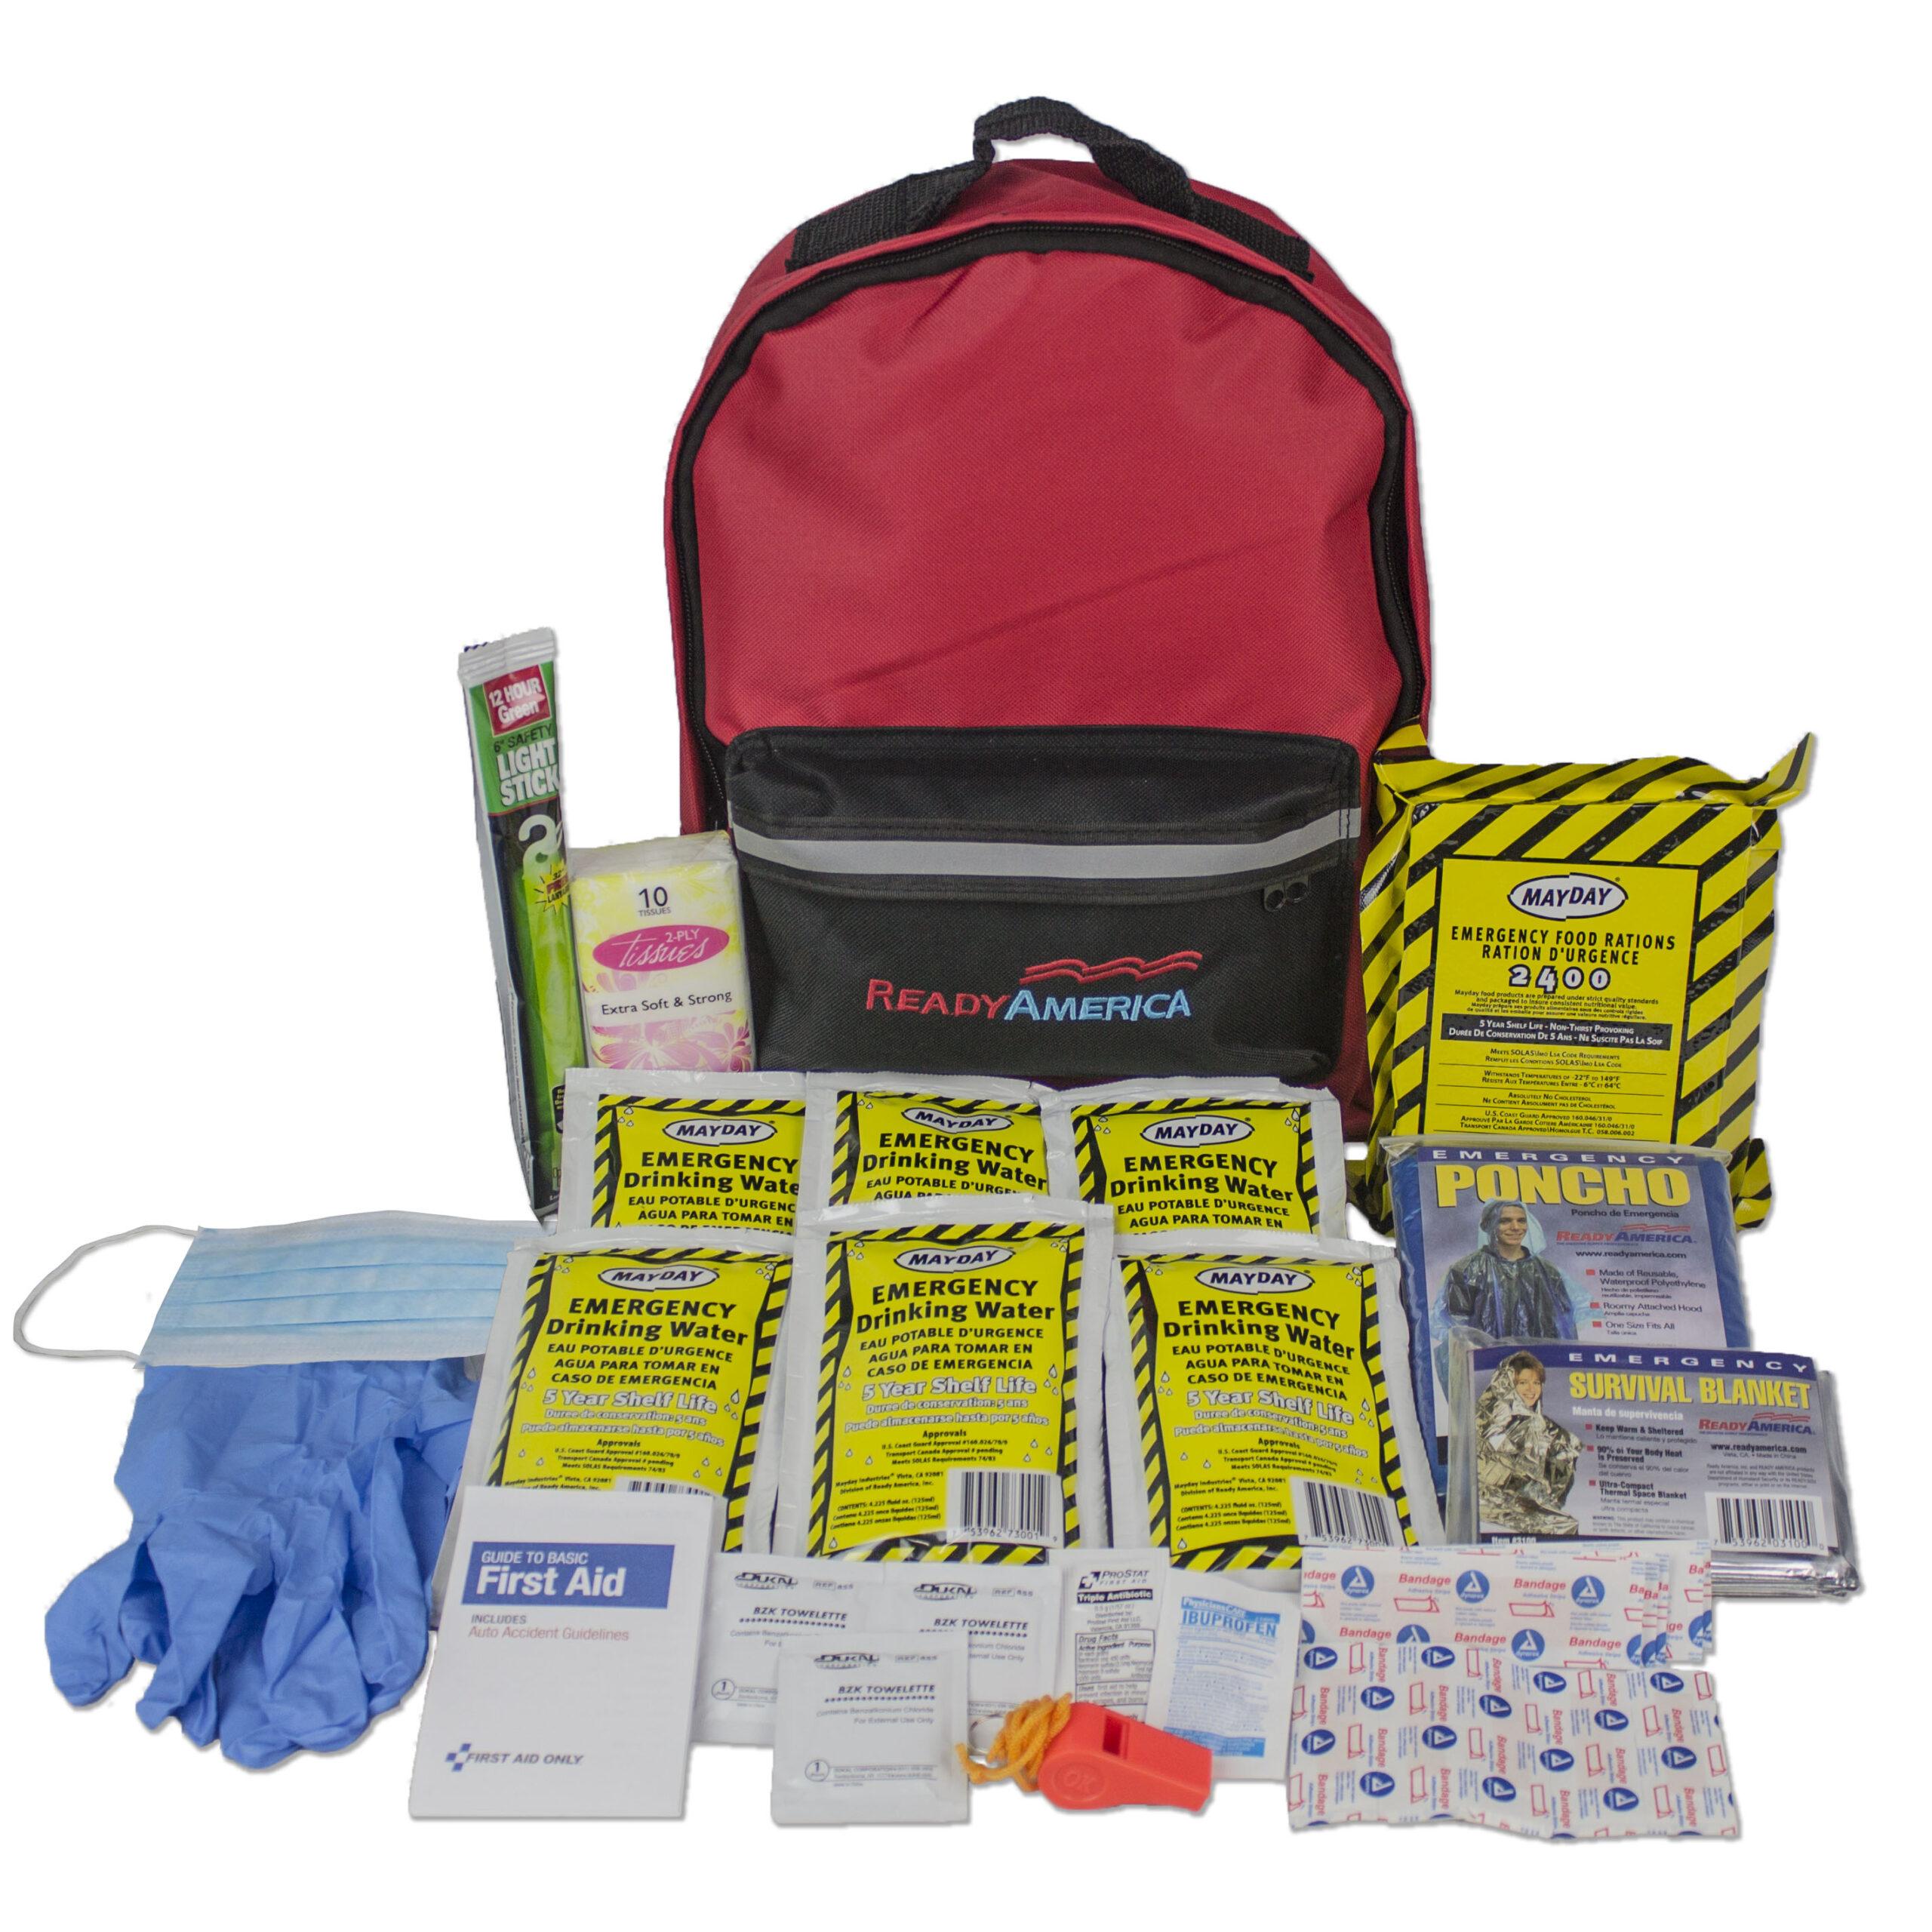 First Aid Kit,230Pieces Car First Aid Emergency Kit,2-in-1 Travel First Aid  Kit+Extra Mini First Aid Kit for  Home,Backpacking,Camping,Hiking,Hunting,Office,Sports & Outdoor :  Amazon.in: Health & Personal Care